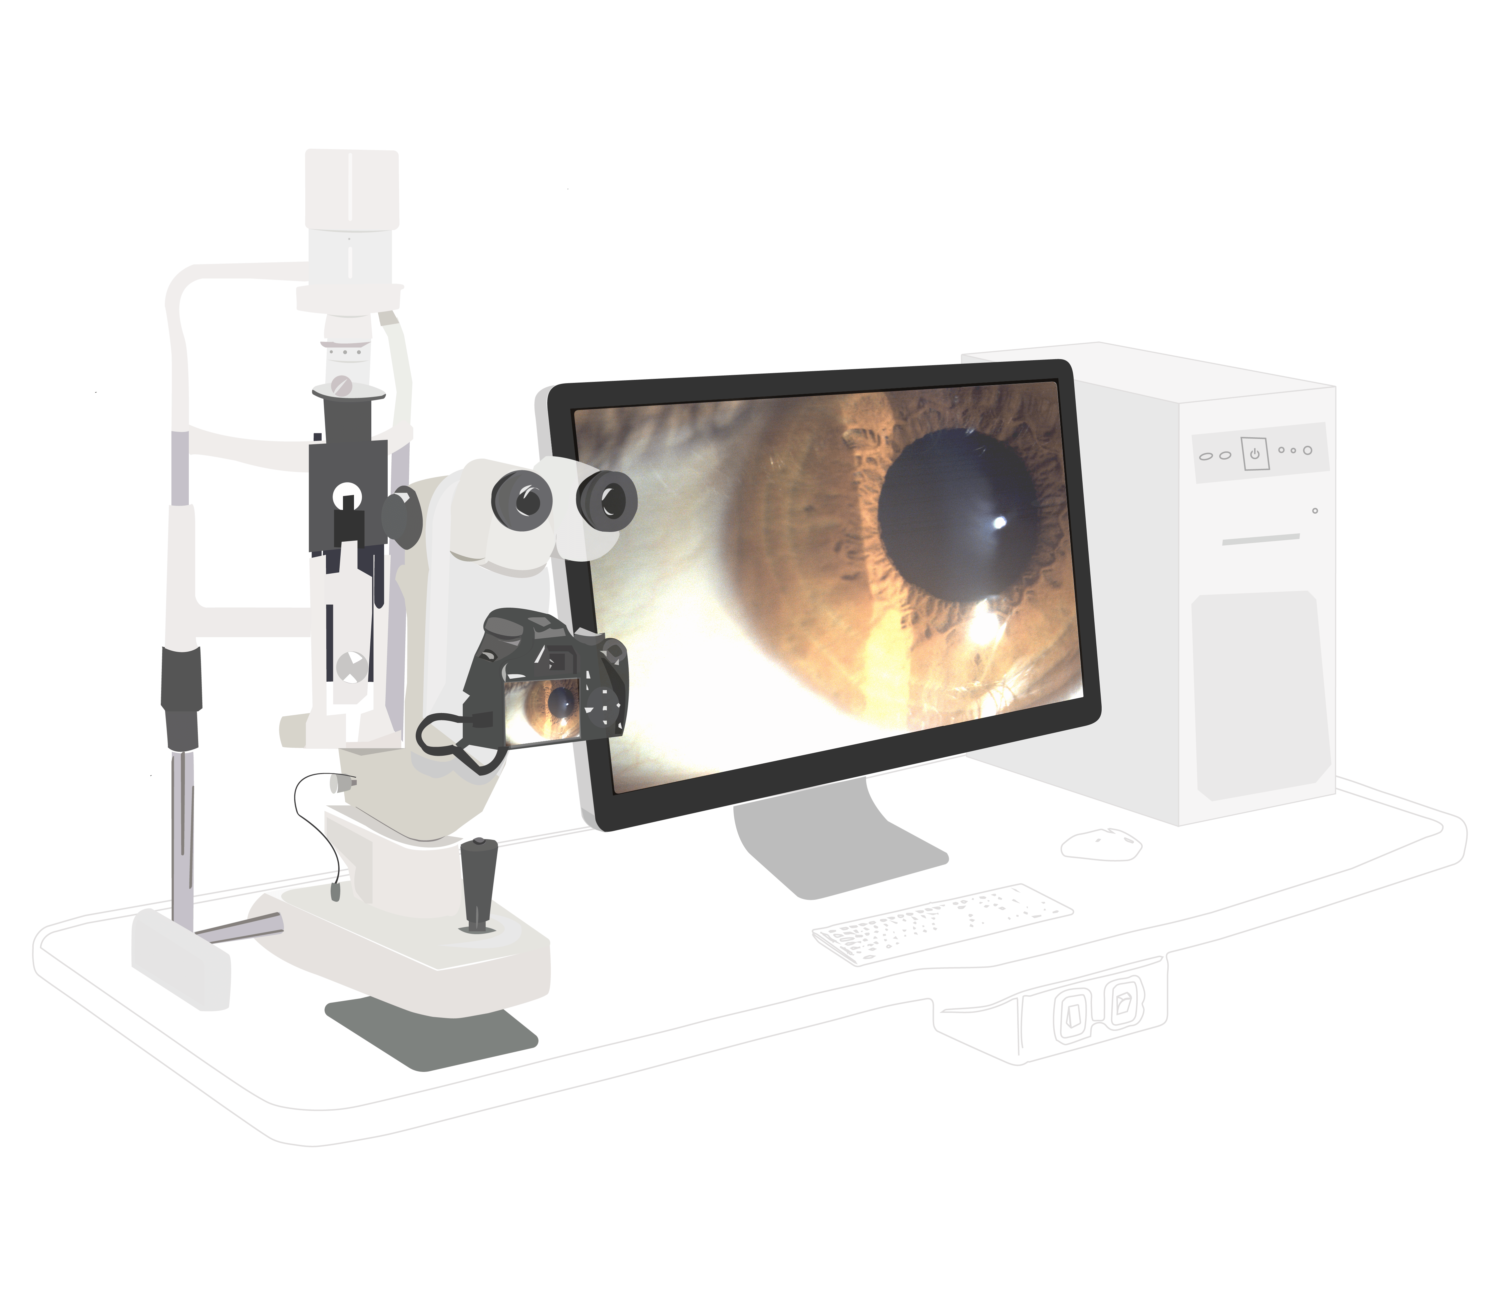 Digital slit lamps are essential for ophthalmic practice.